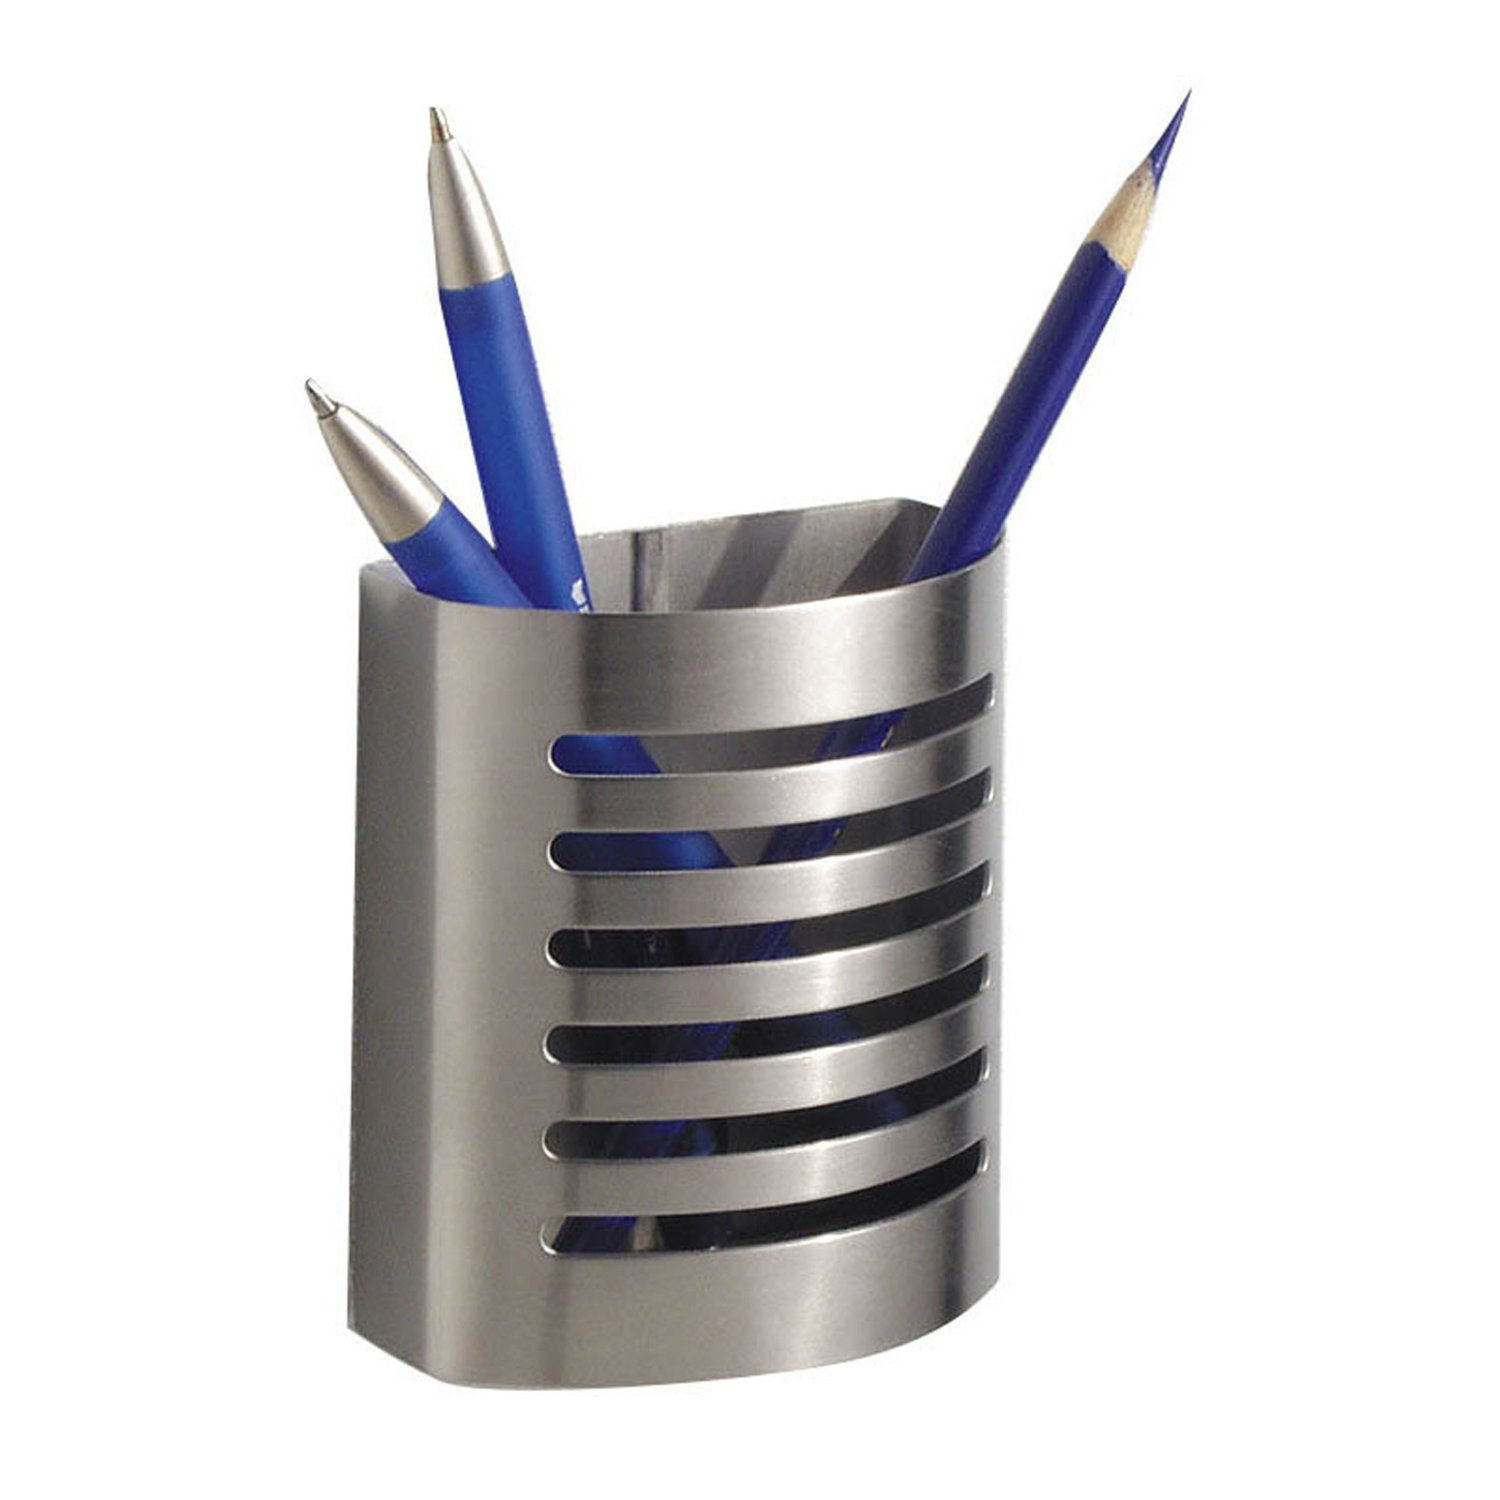 InterDesign Forma Magnetic Pencil Cup, Brushed Stainless Steel  $6.35